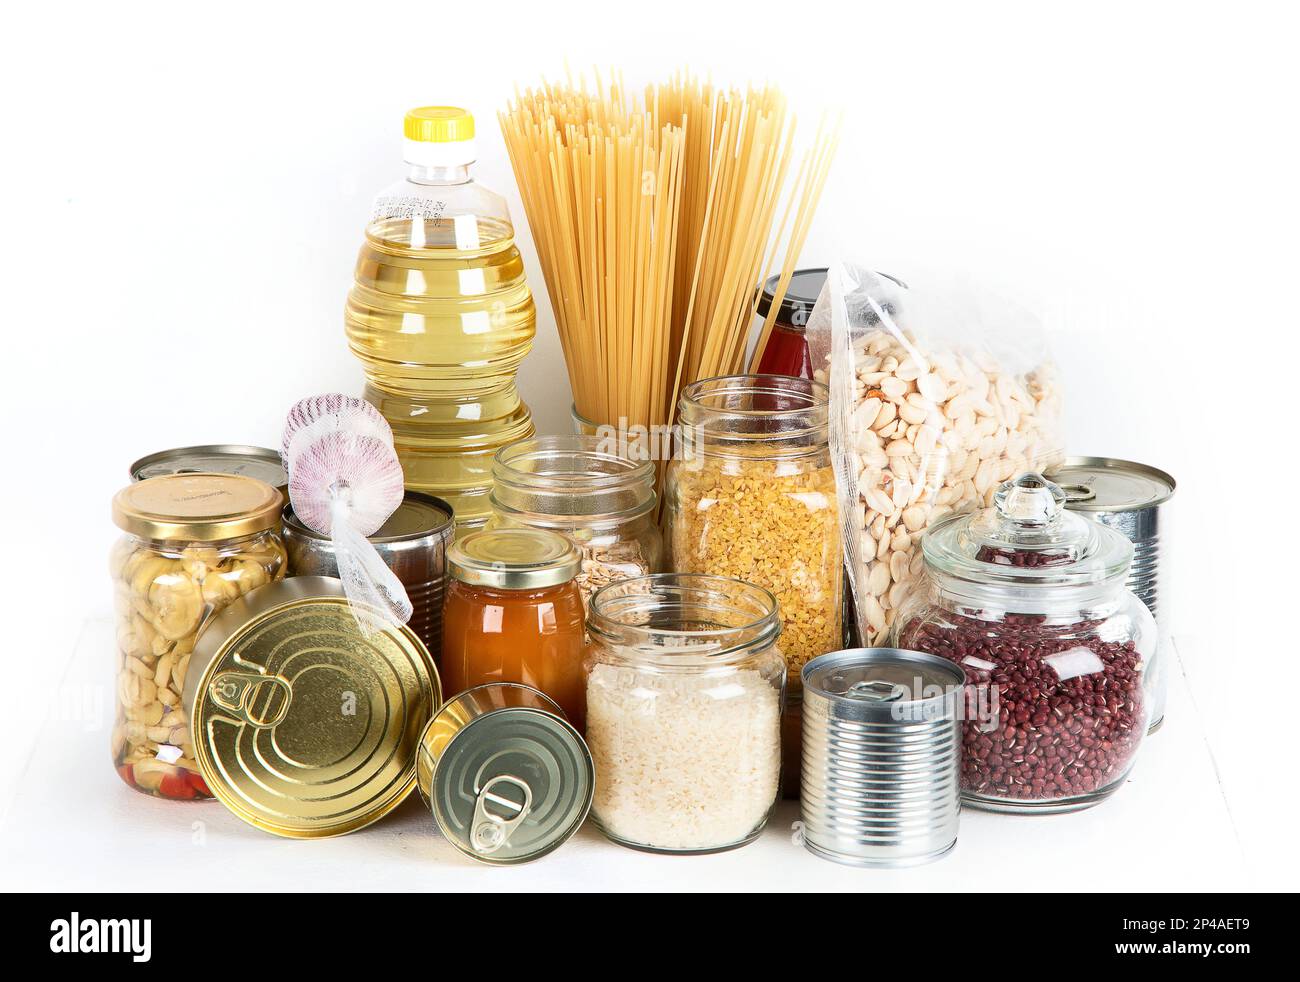 Food supplies. Crisis food stock. Different glass jars with grains, pasta, oil, nut, canned food Stock Photo